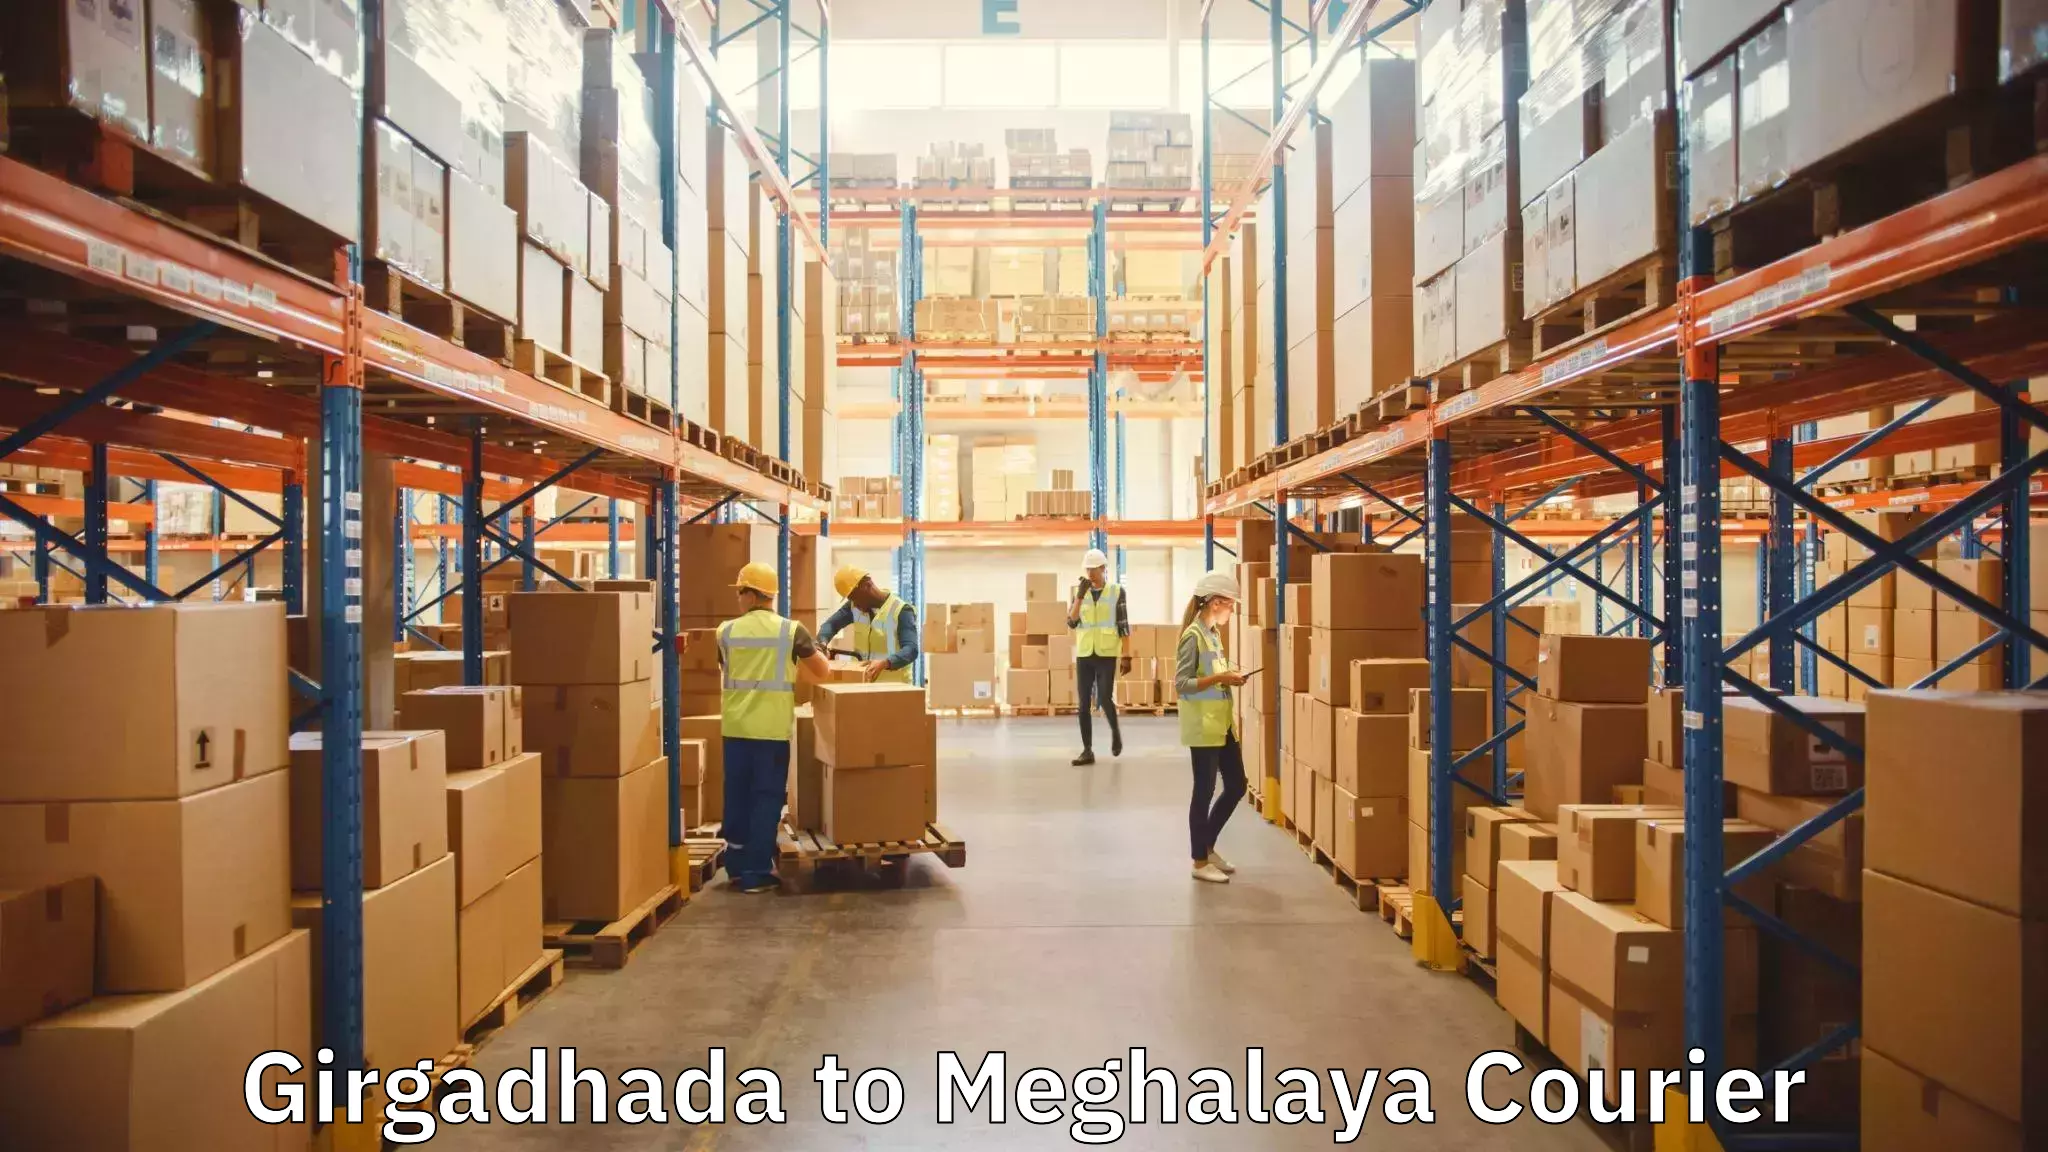 Reliable relocation services in Girgadhada to Garobadha